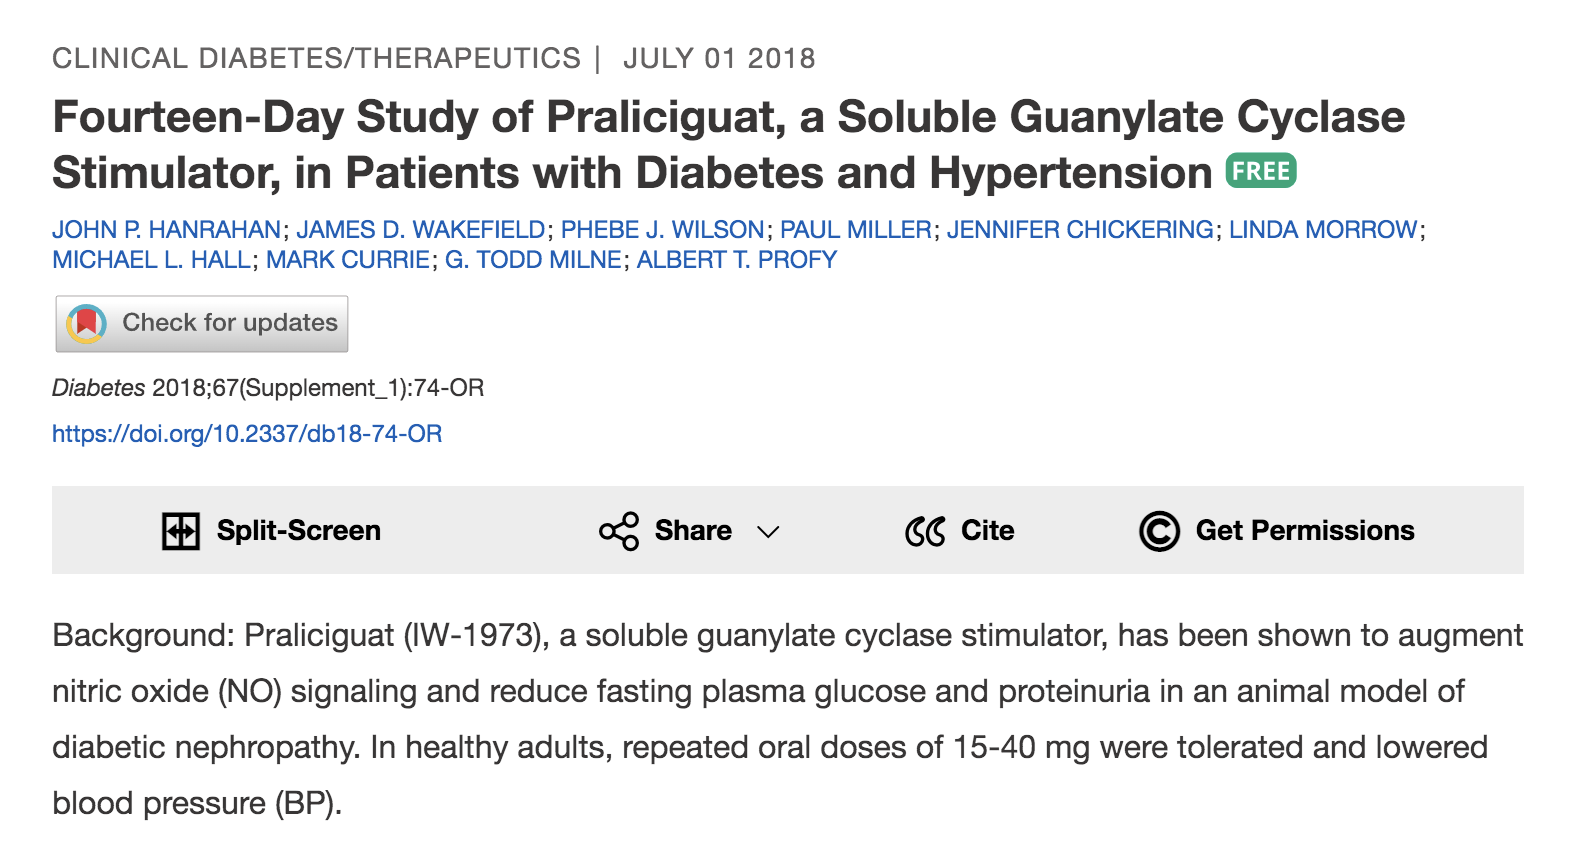 image of Fourteen-Day Study of Praliciguat, a Soluble Guanylate Cyclase Stimulator, in Patients with Diabetes and Hypertension